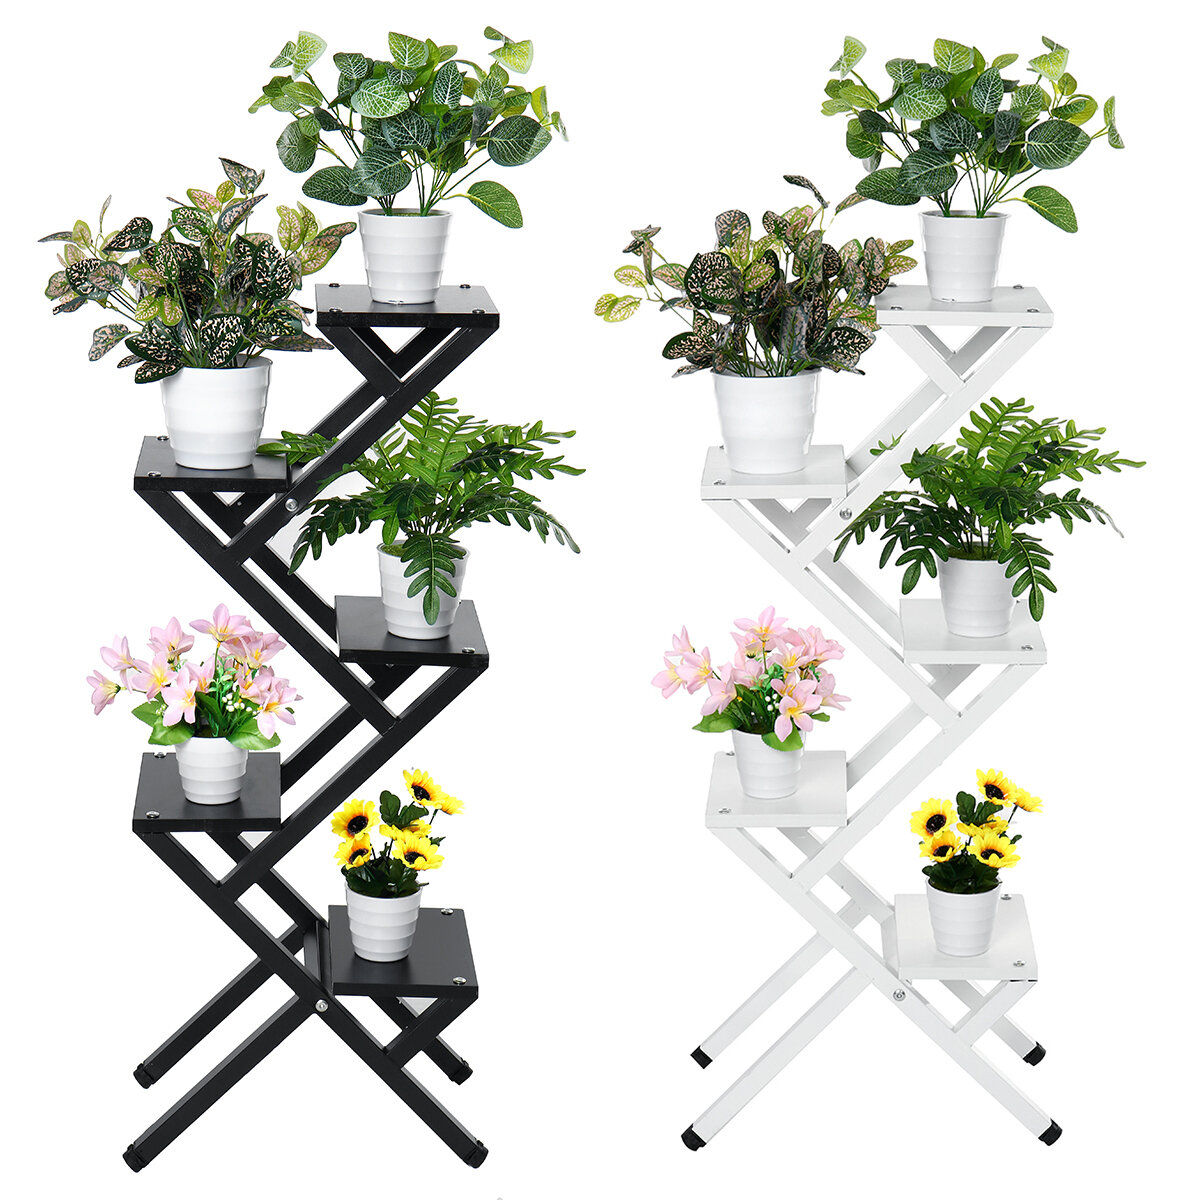 4/5 Layers Multifunctional Iron Flower Stand Ladder Plant Display Shelf Balcony Garden Decor Home Of